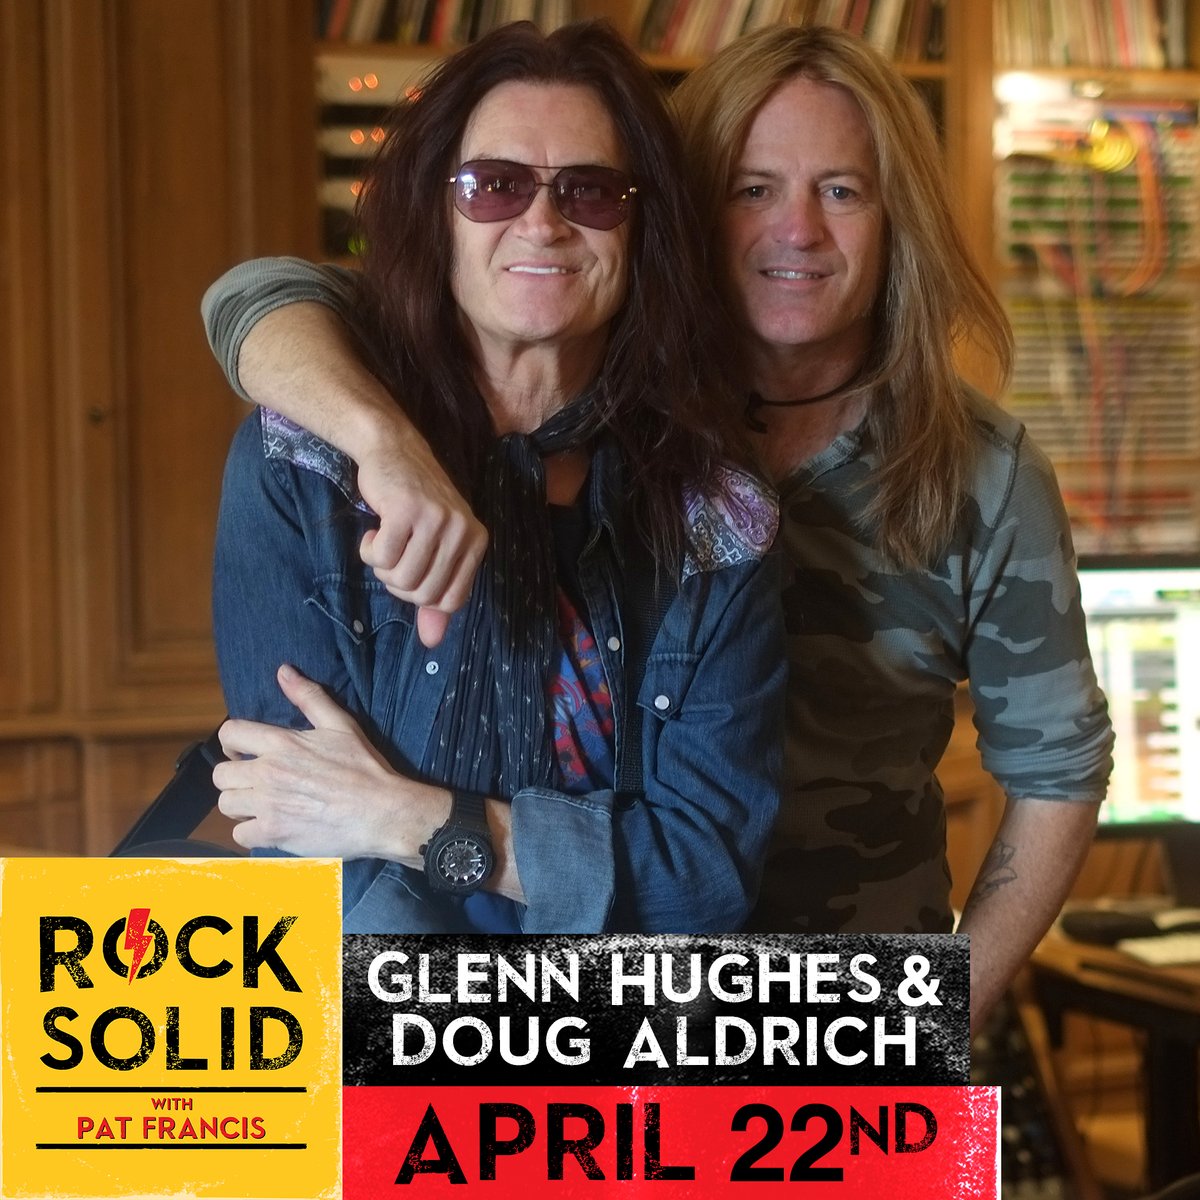 Glenn and Doug recently chatted with Rock Solid's Pat Francis.  Tune in on Thursday 22nd April to have a listen here:
rocksolidpodcast.com

#TheDeadDaisies #GlennHughes #DougAldrich #VoiceofRock #RockBassist #RockGuitarist #HOLYGROUND